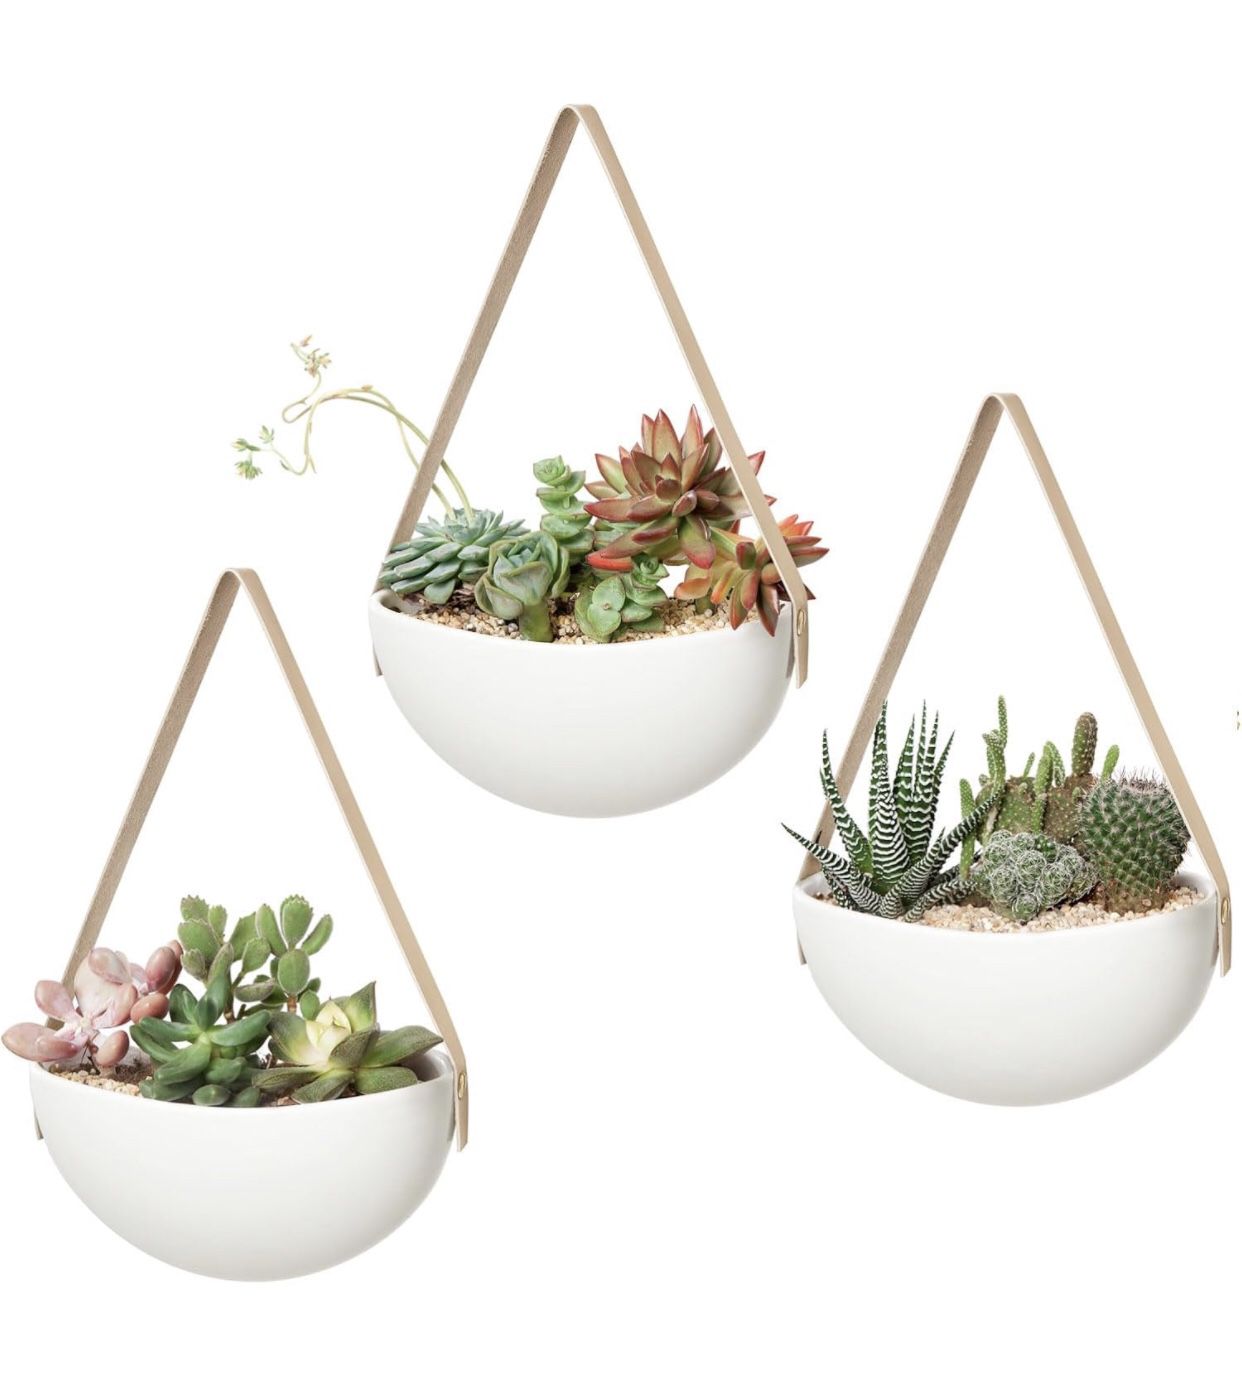 Wall Planter for Indoor Plants Ceramic Hanging Planter Holder-set Of 3 (plant Not Included)